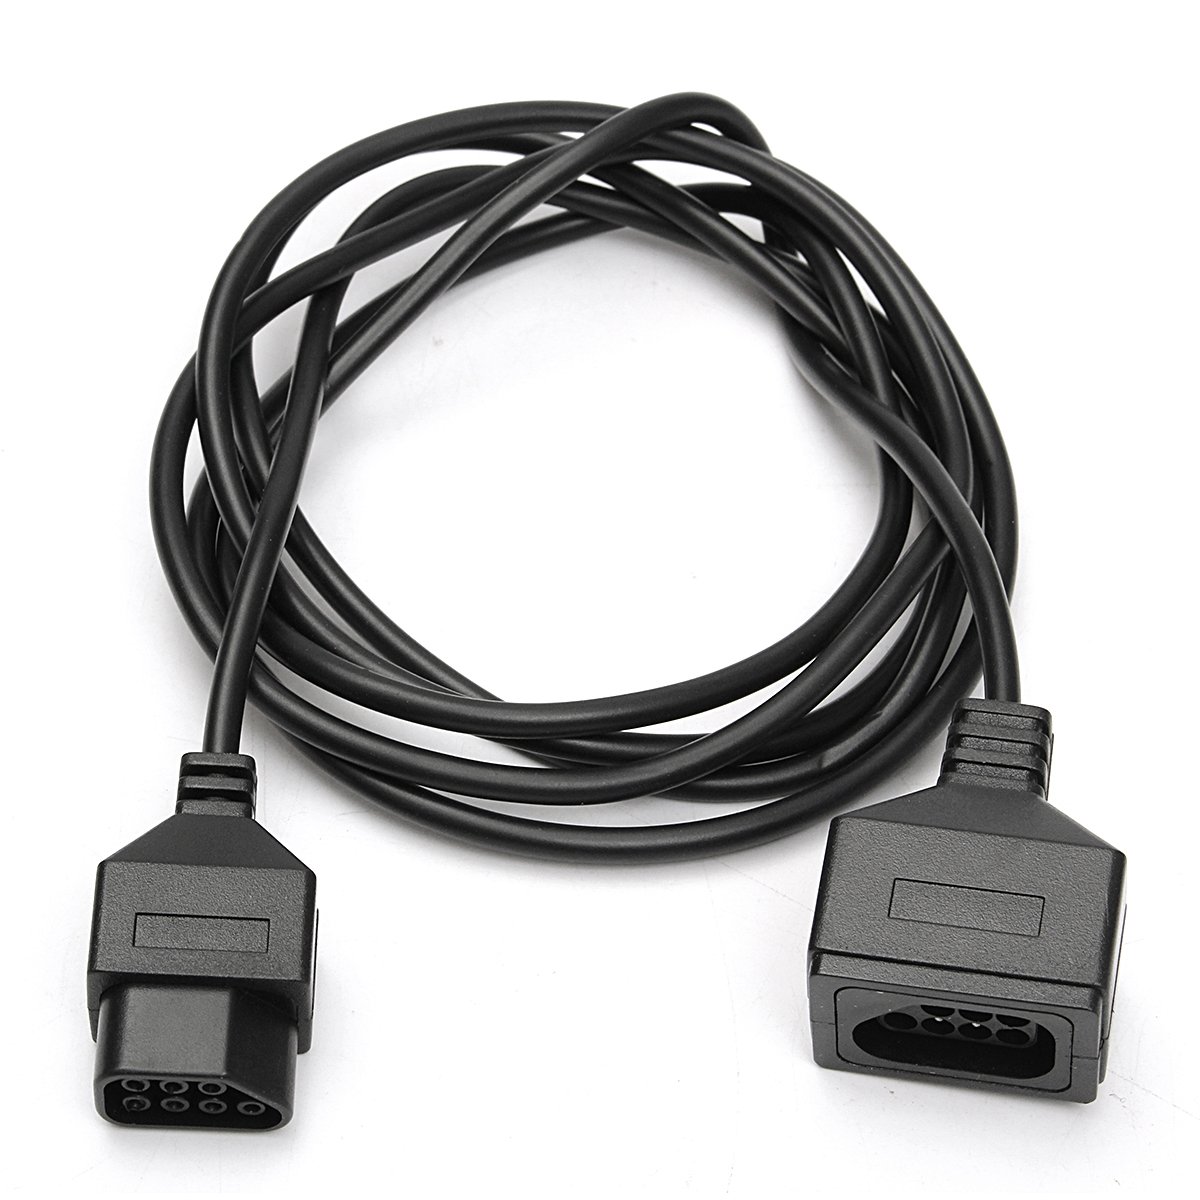 6inch Extension Cable Cord for Nintendo NES Game Controller Gamepad Mini Classic Bit 2